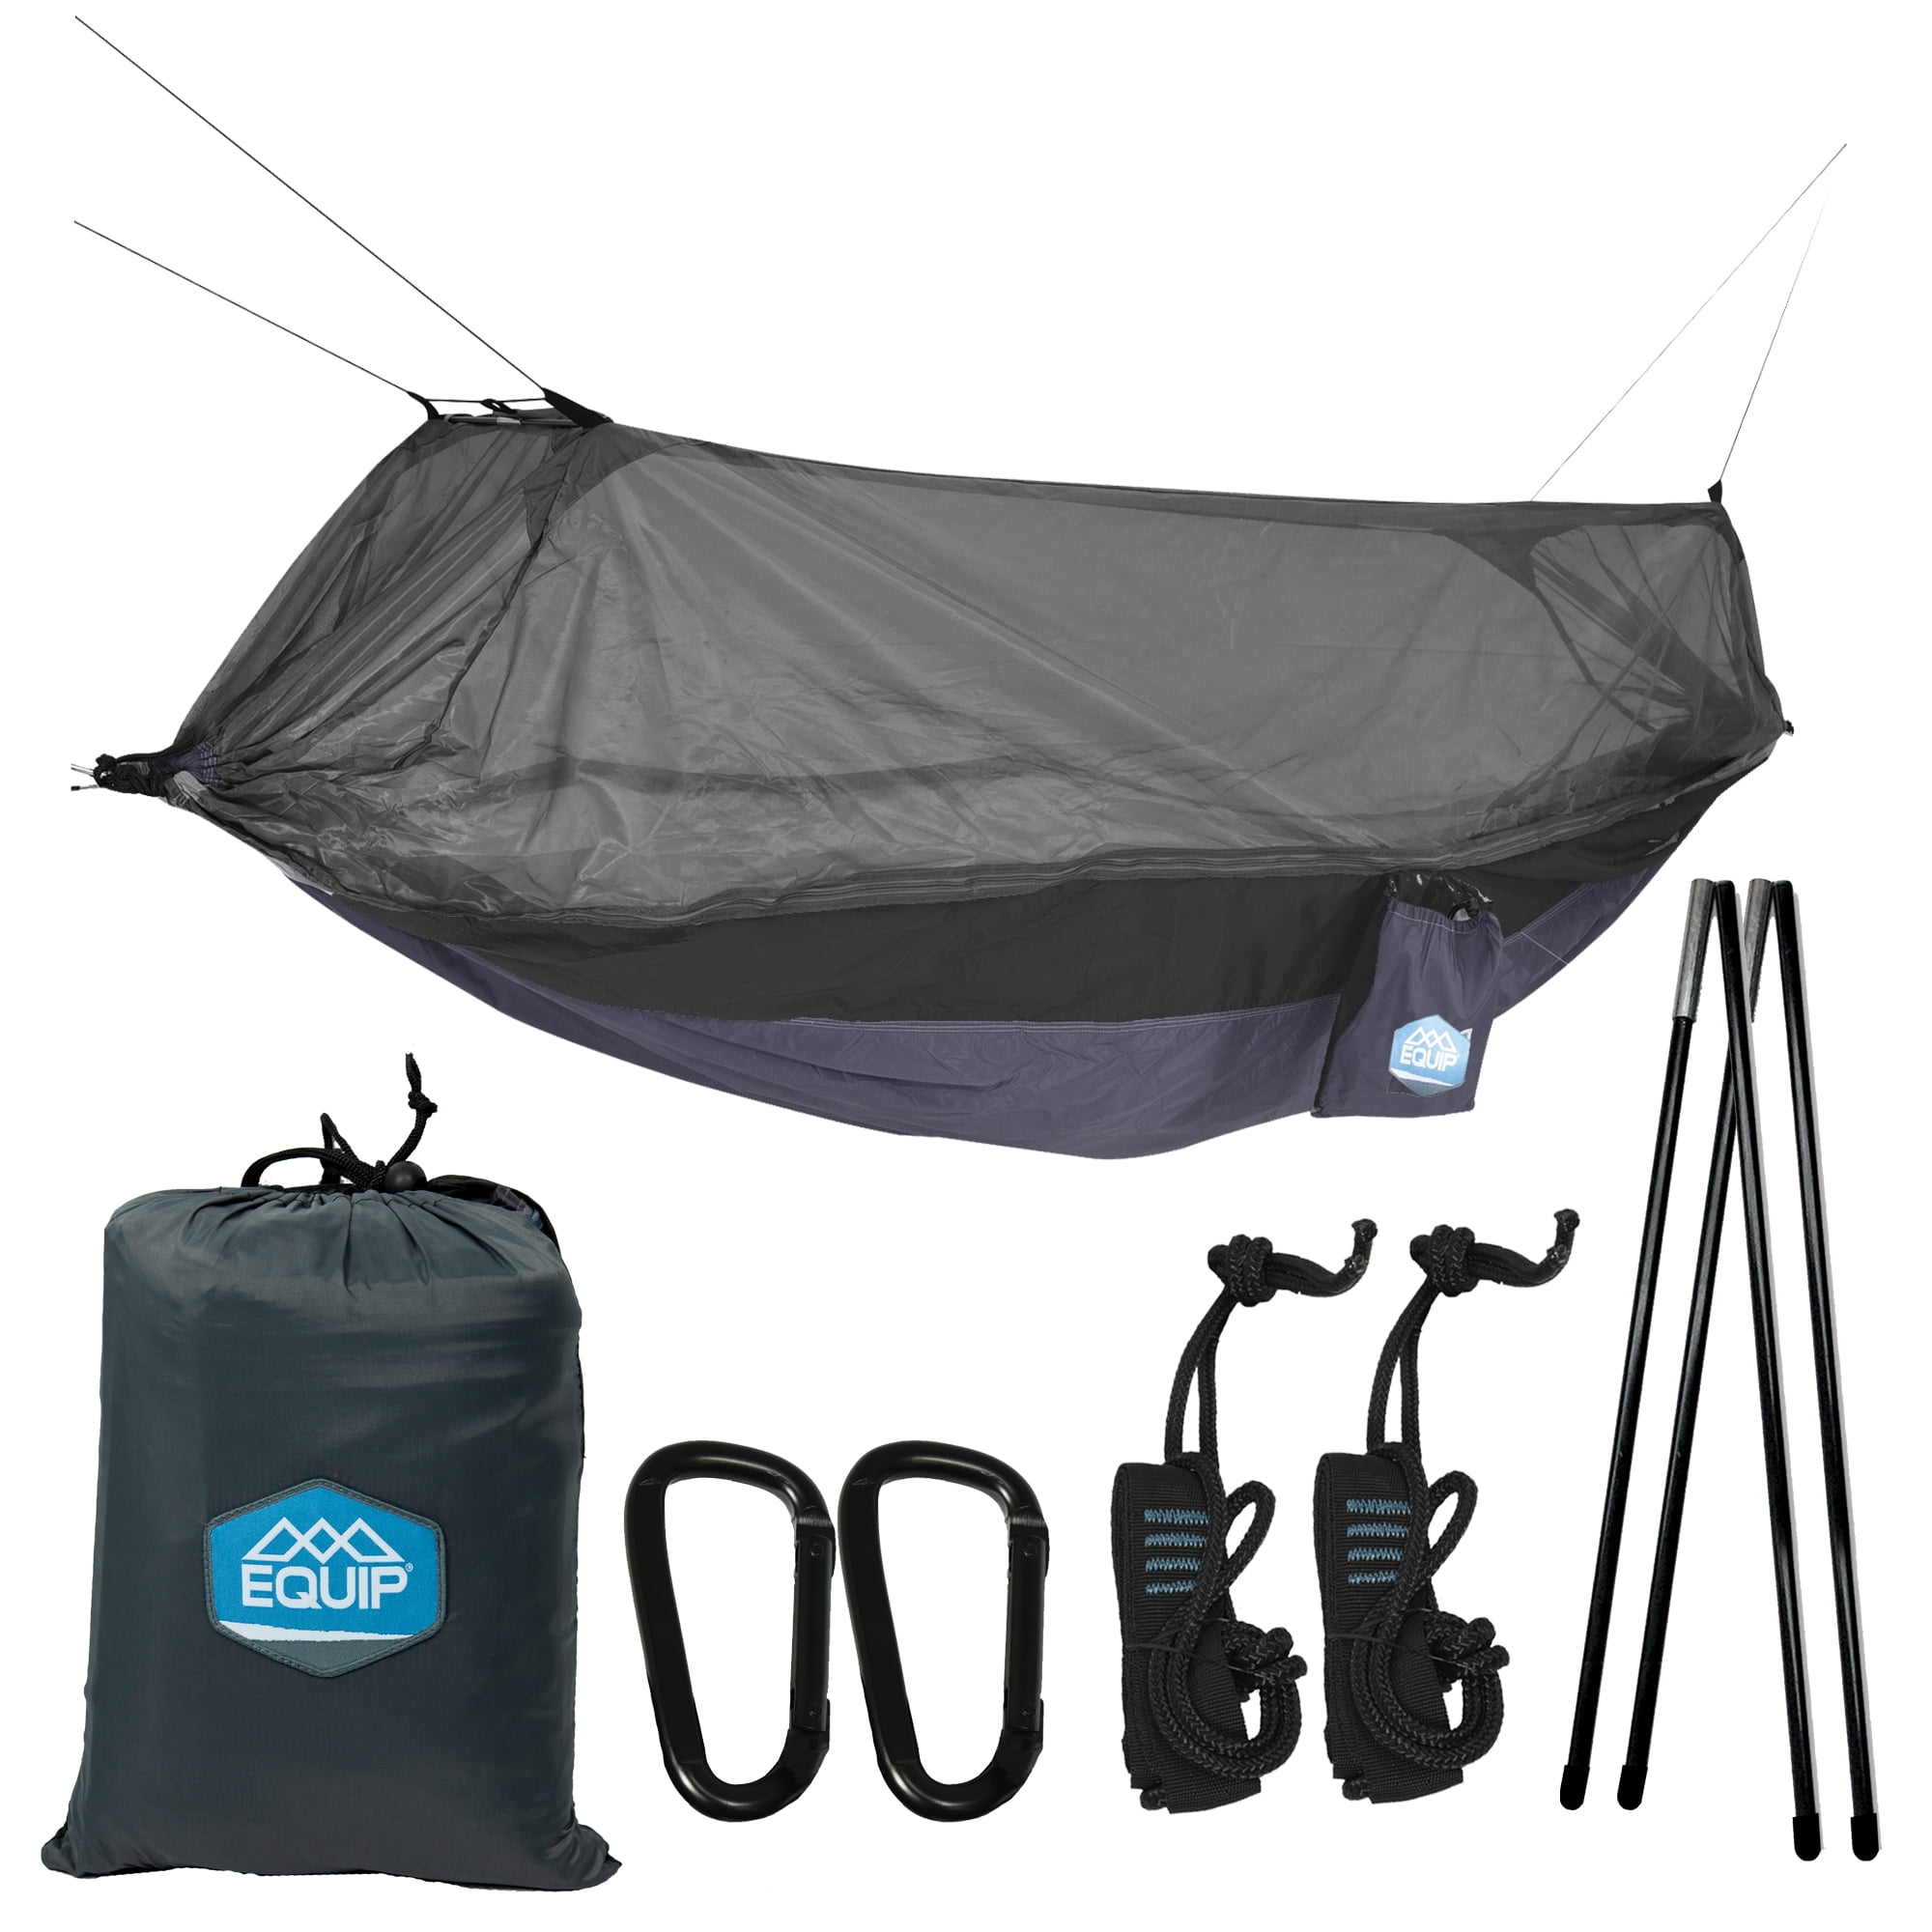 Equip 1 Person Nylon Mosquito Hammock with Attached Bug Net - Dark Gray & Black - 115 x 59 in